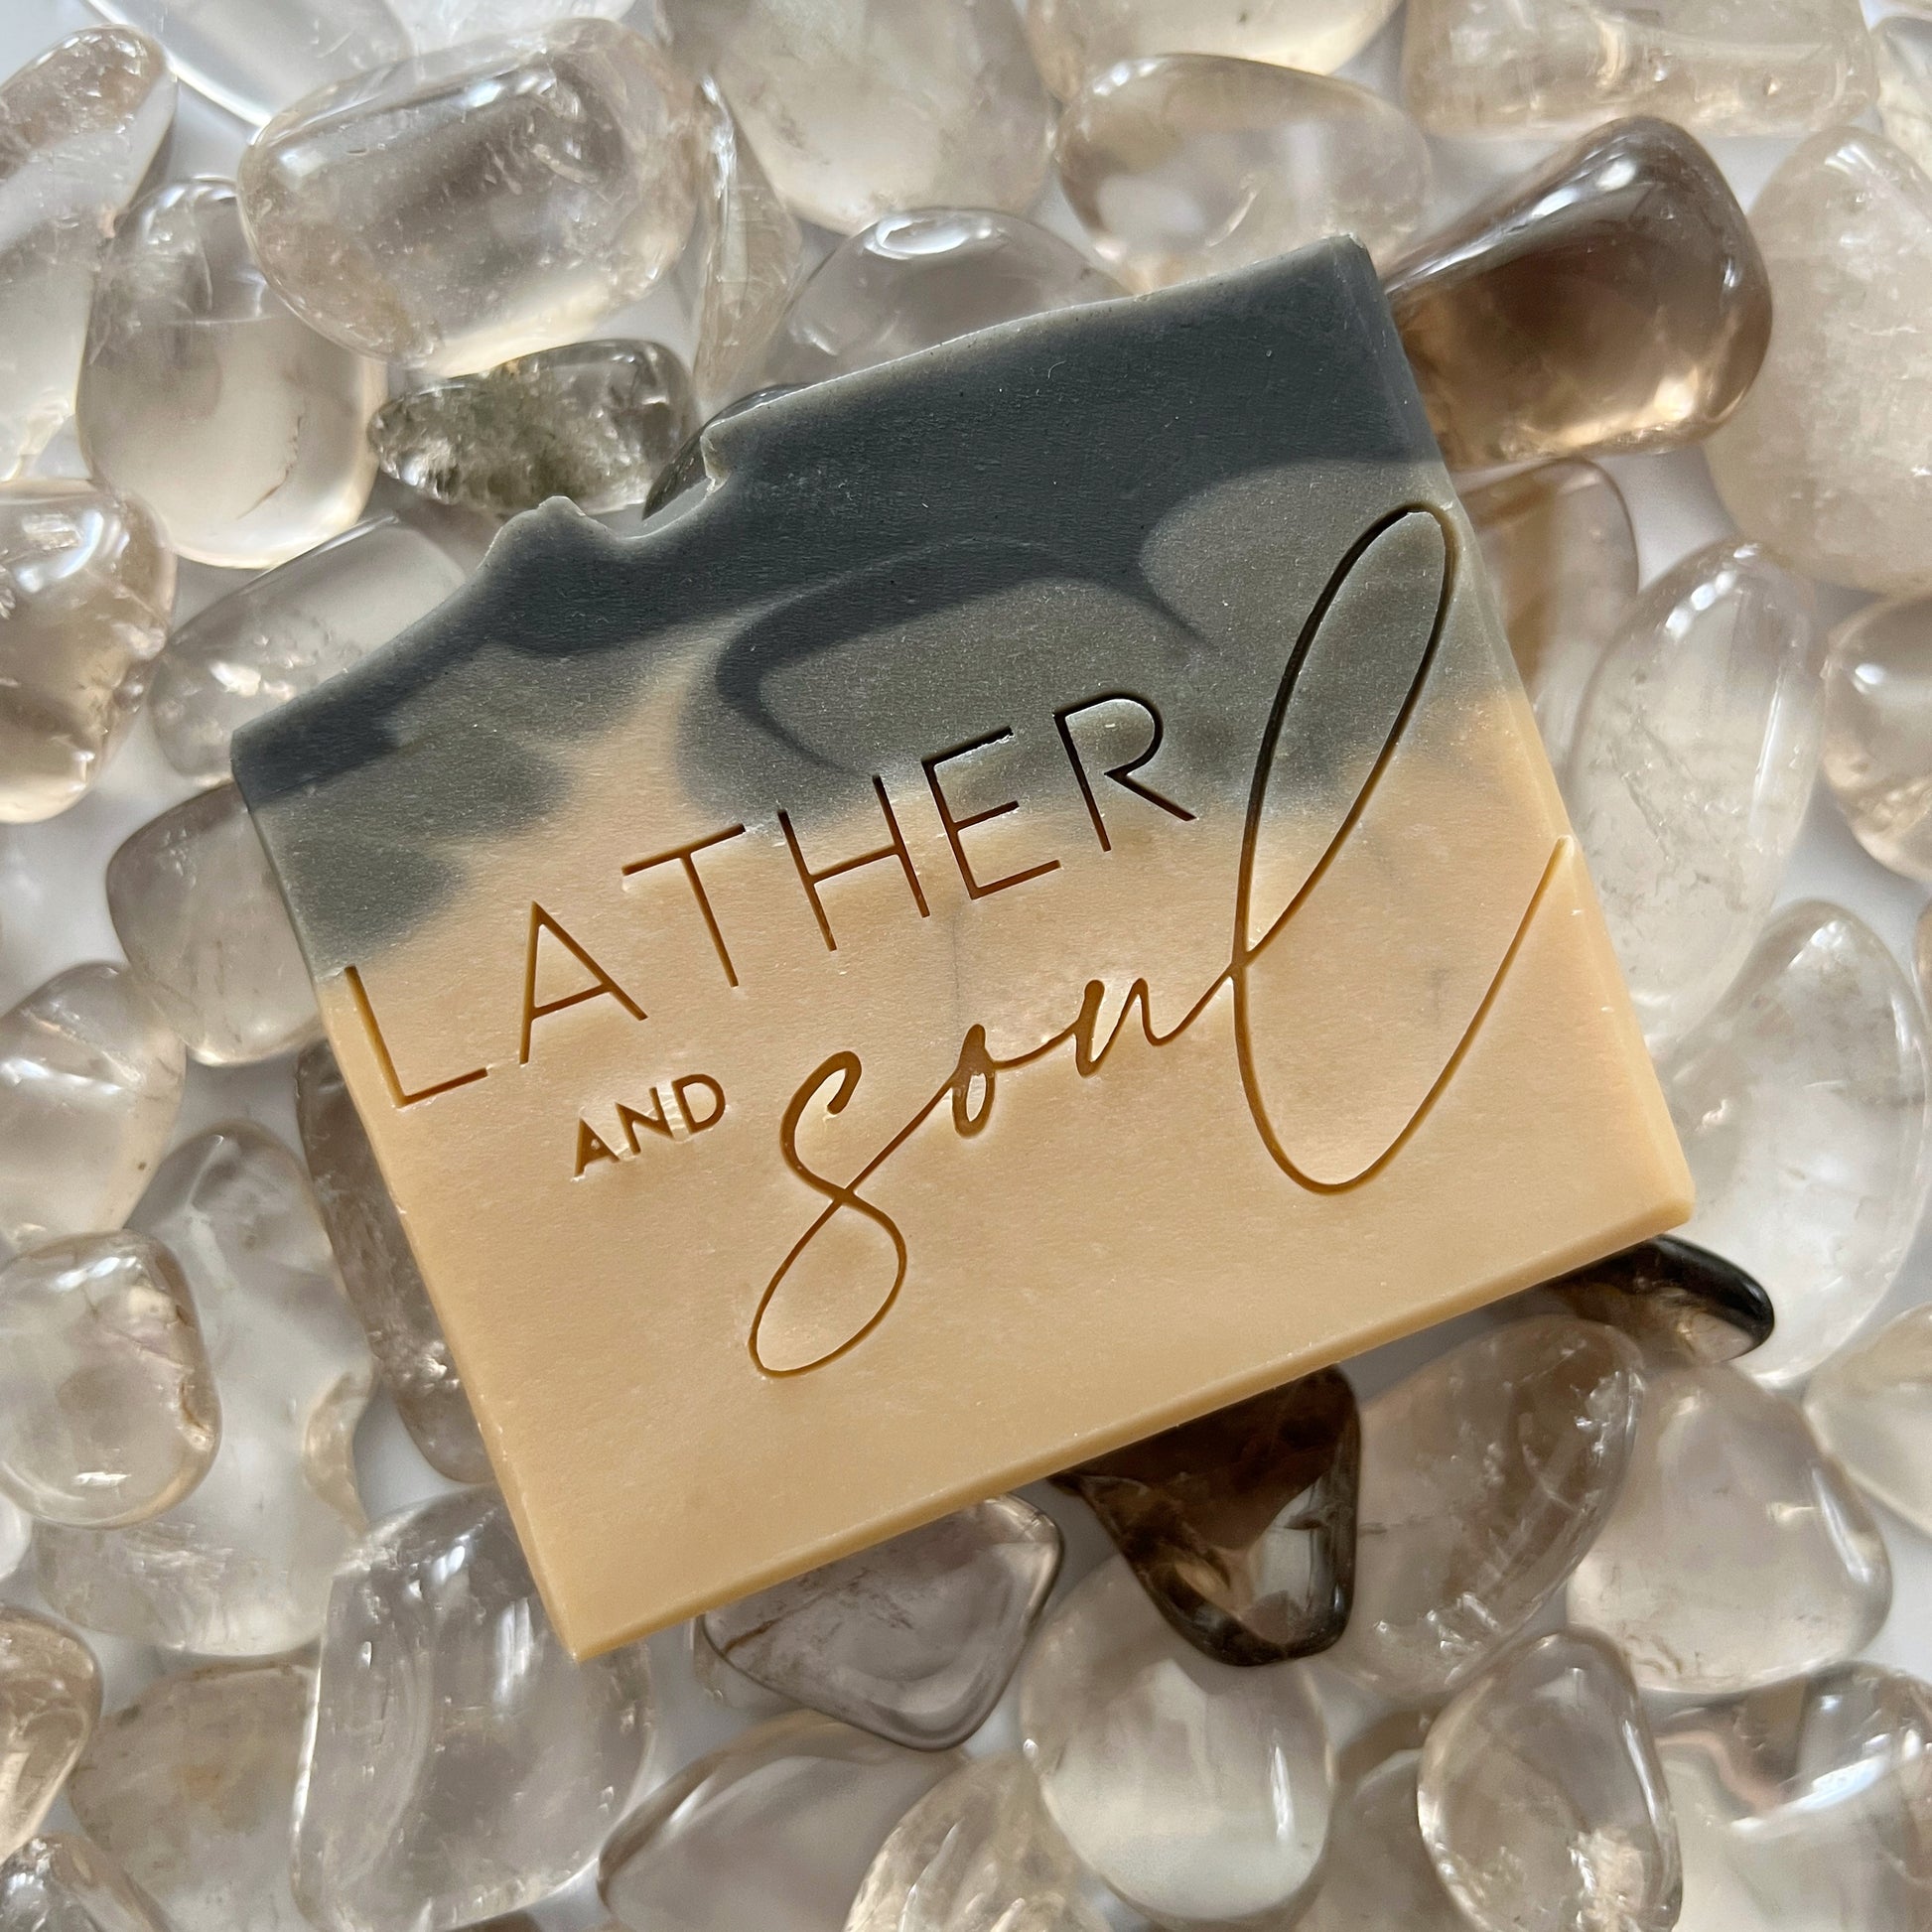 An artisan crystal soap by Lather and Soul Skincare is colored black and brown and sits on a pile of smoky quartz crystals.